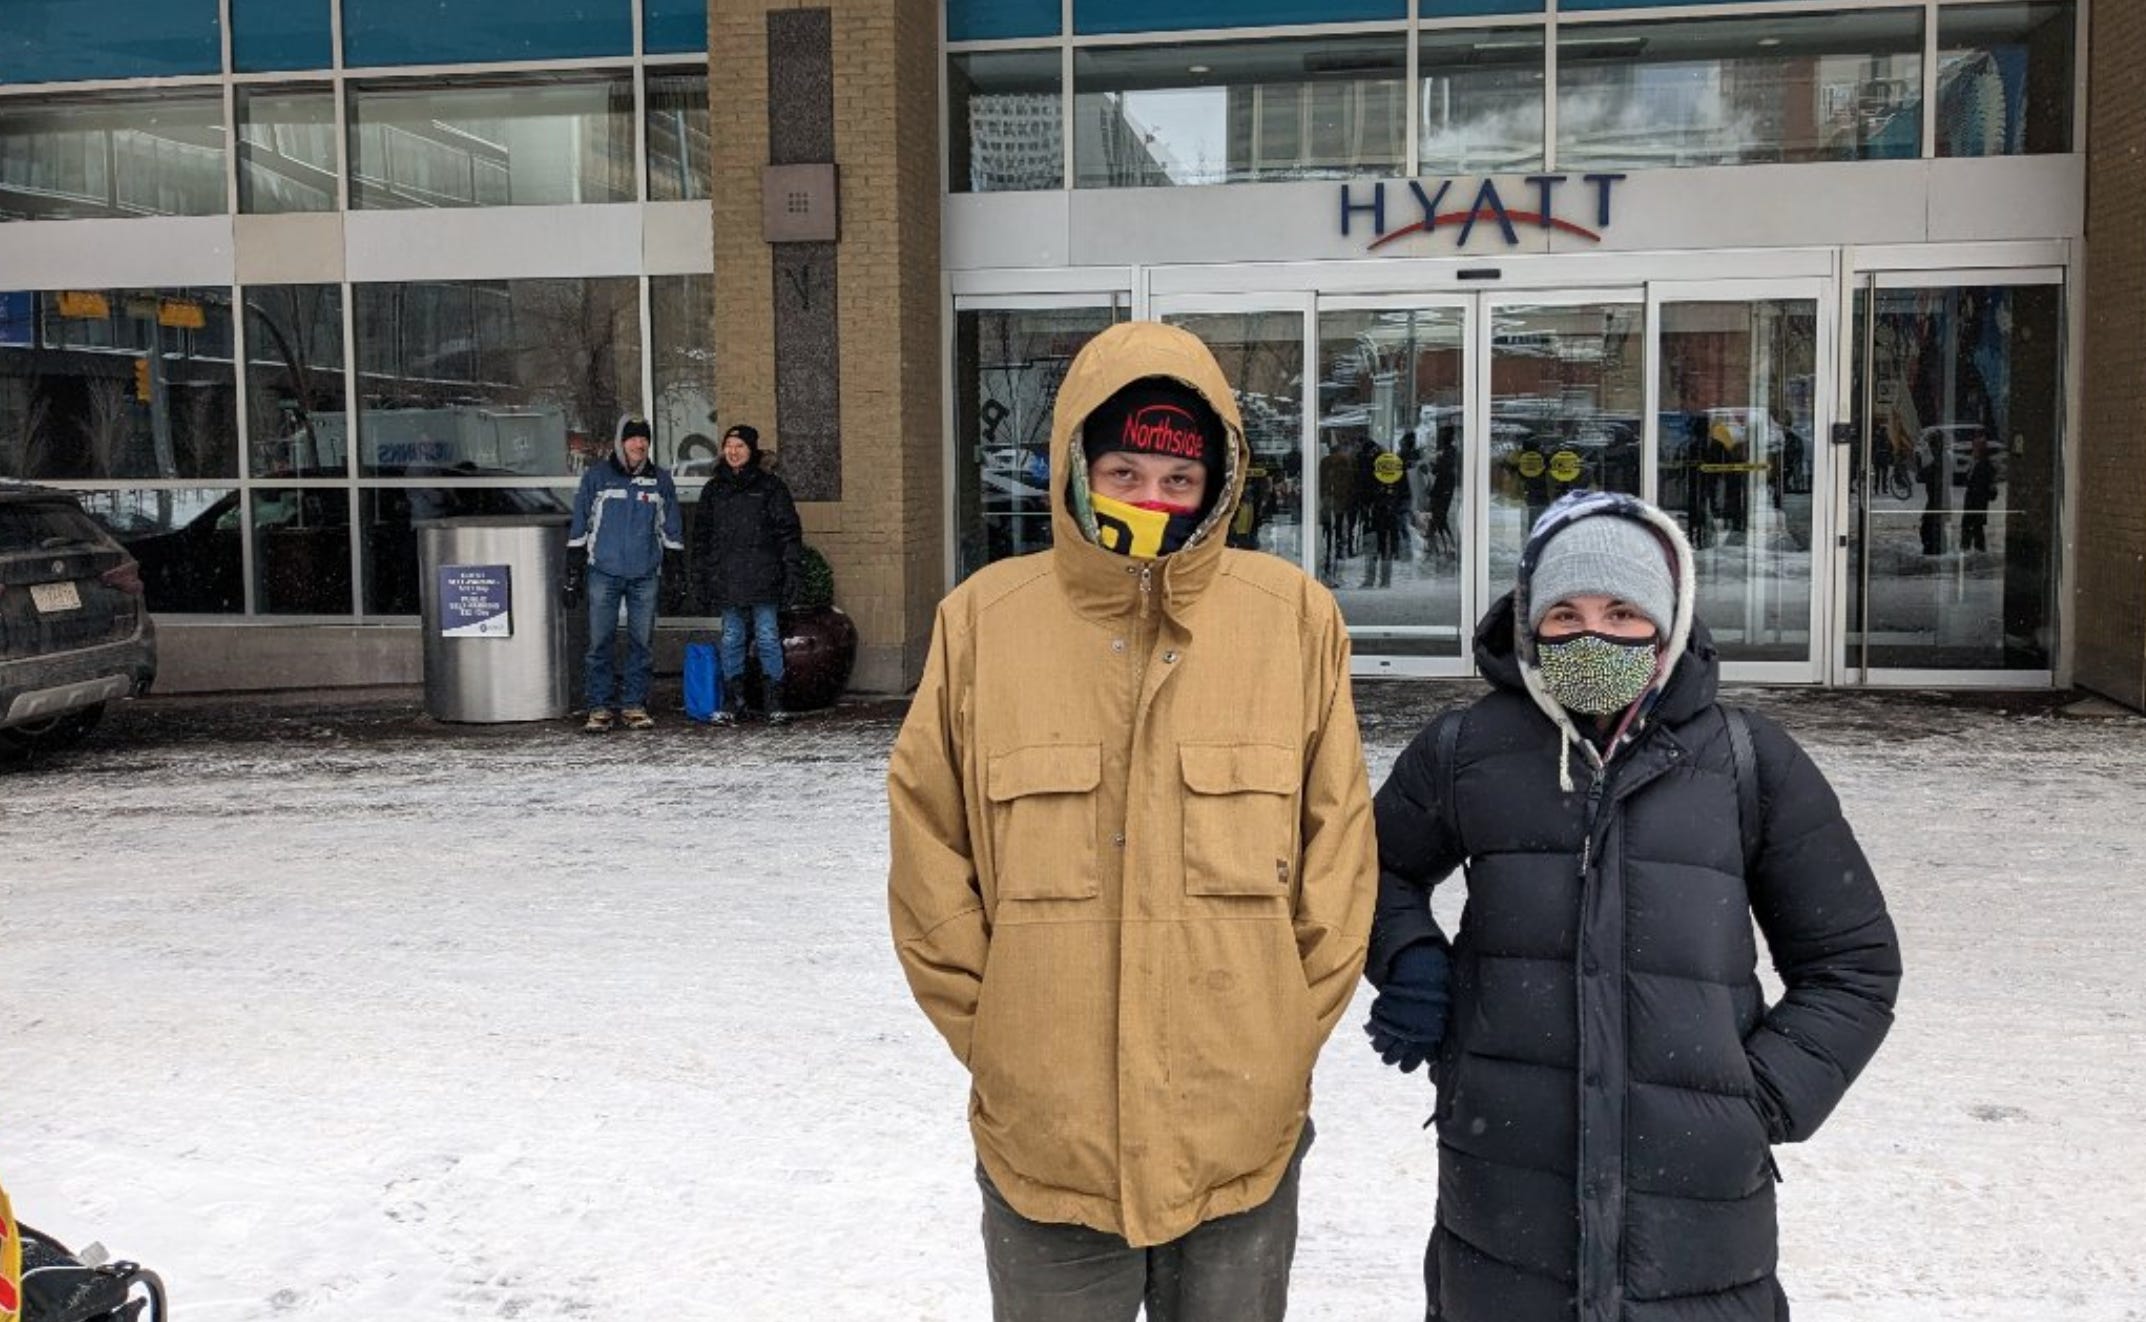 Two people stand in the foreground bundled up head to toe including face coverings, with two characters in the background beside the entrance to the Hyatt Regency in downtown Calgary. Snow is on the ground all around